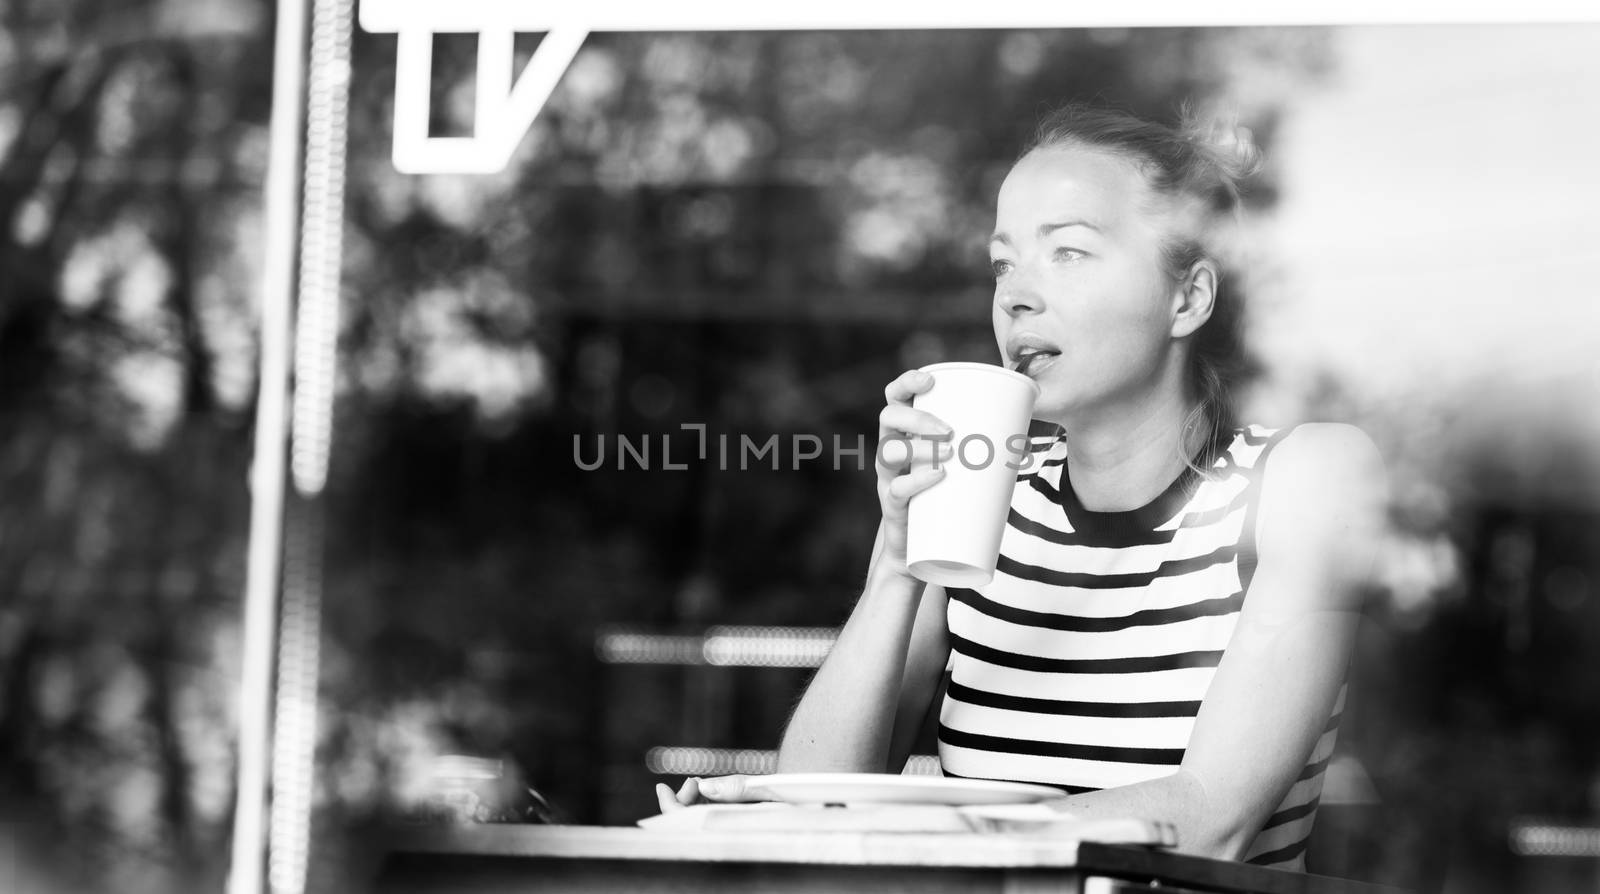 Young caucasian woman sitting alone in coffee shop drinking american coffee, people watching, thoughtfully looking trough the coffee shop window. Black and white image.